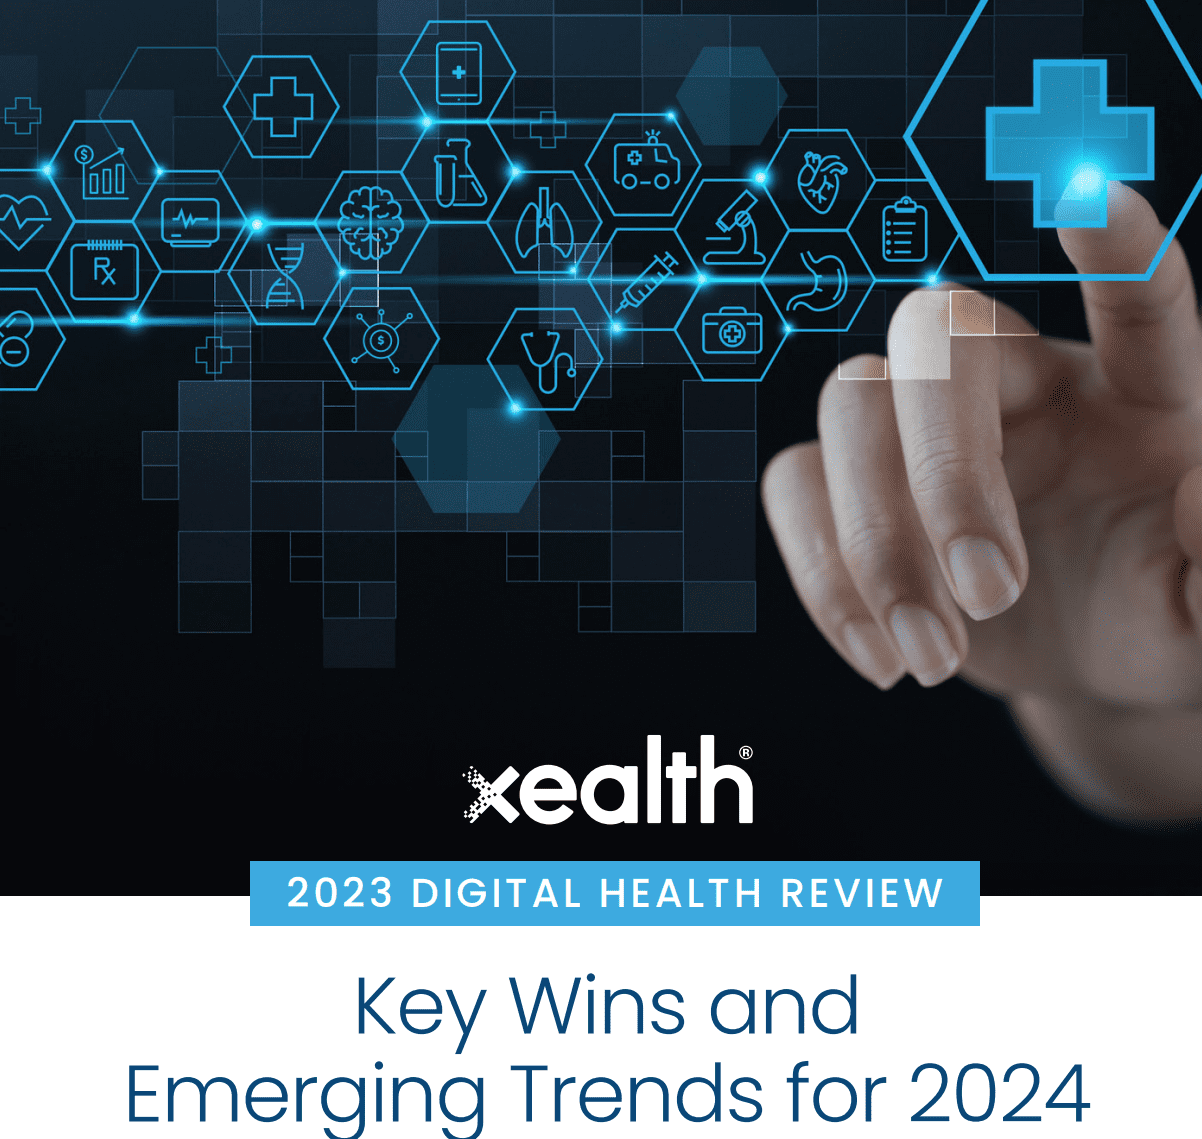 Xealth Digital Health Report Reveals 8 Emerging Trends for 2024